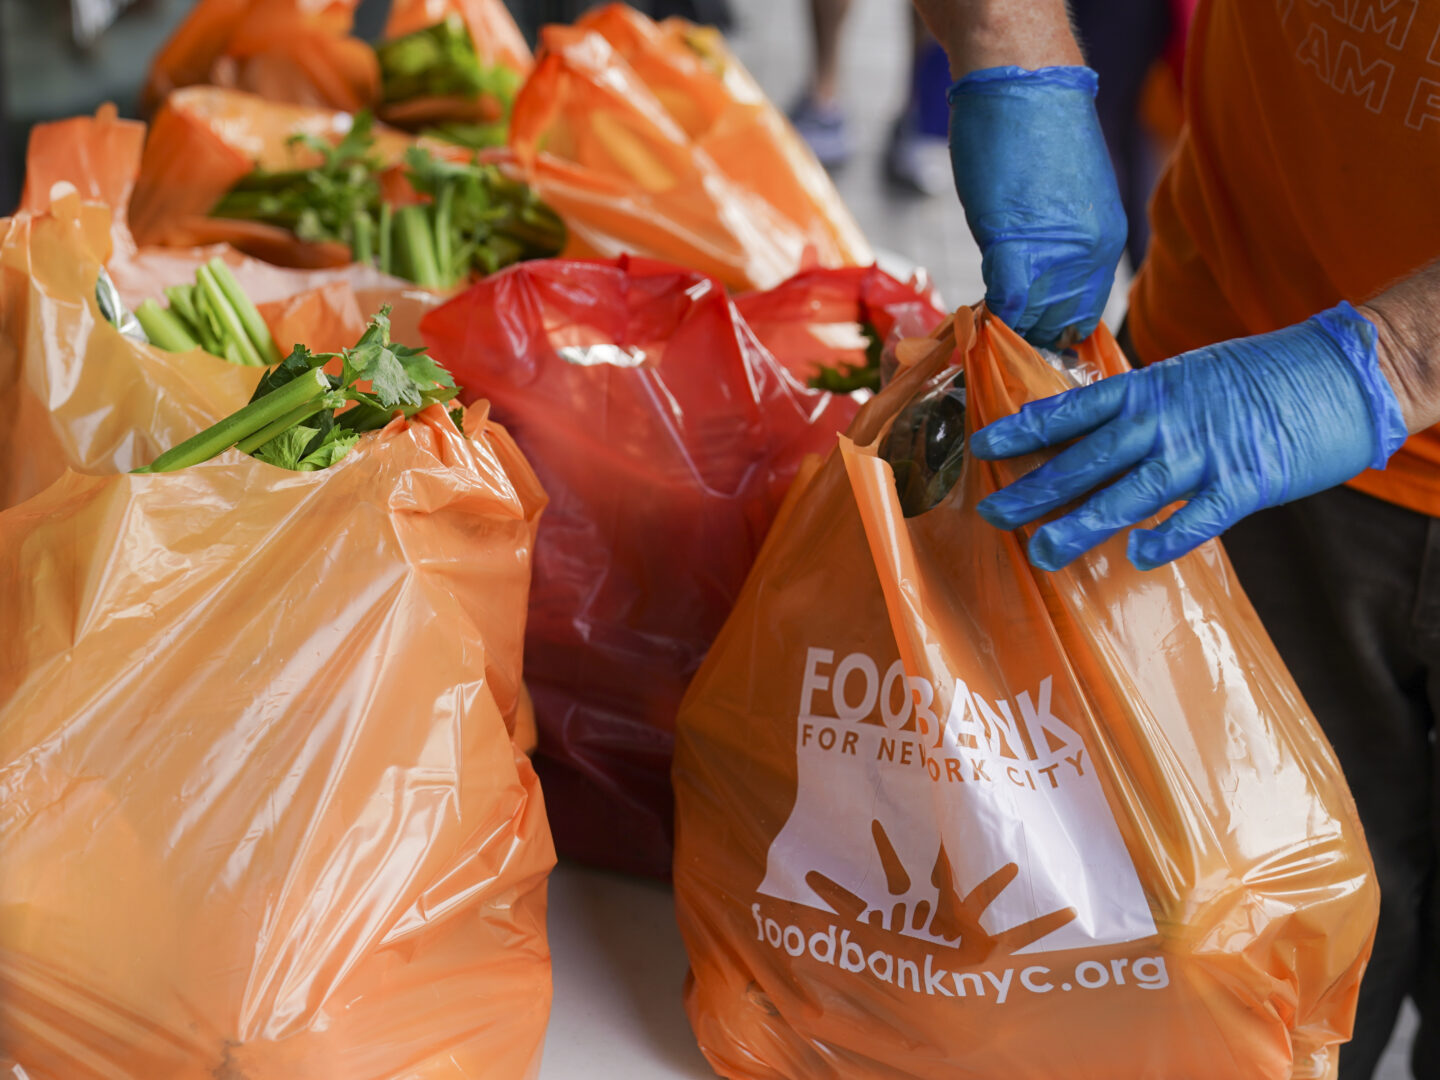 Fresh produce and shelf-stable pantry items are bagged for collection outside Barclays Center as Food Bank For New York City provides assistance to those in need due to the COVID-19 pandemic, Thursday, Sept. 10, 2020, in New York. 